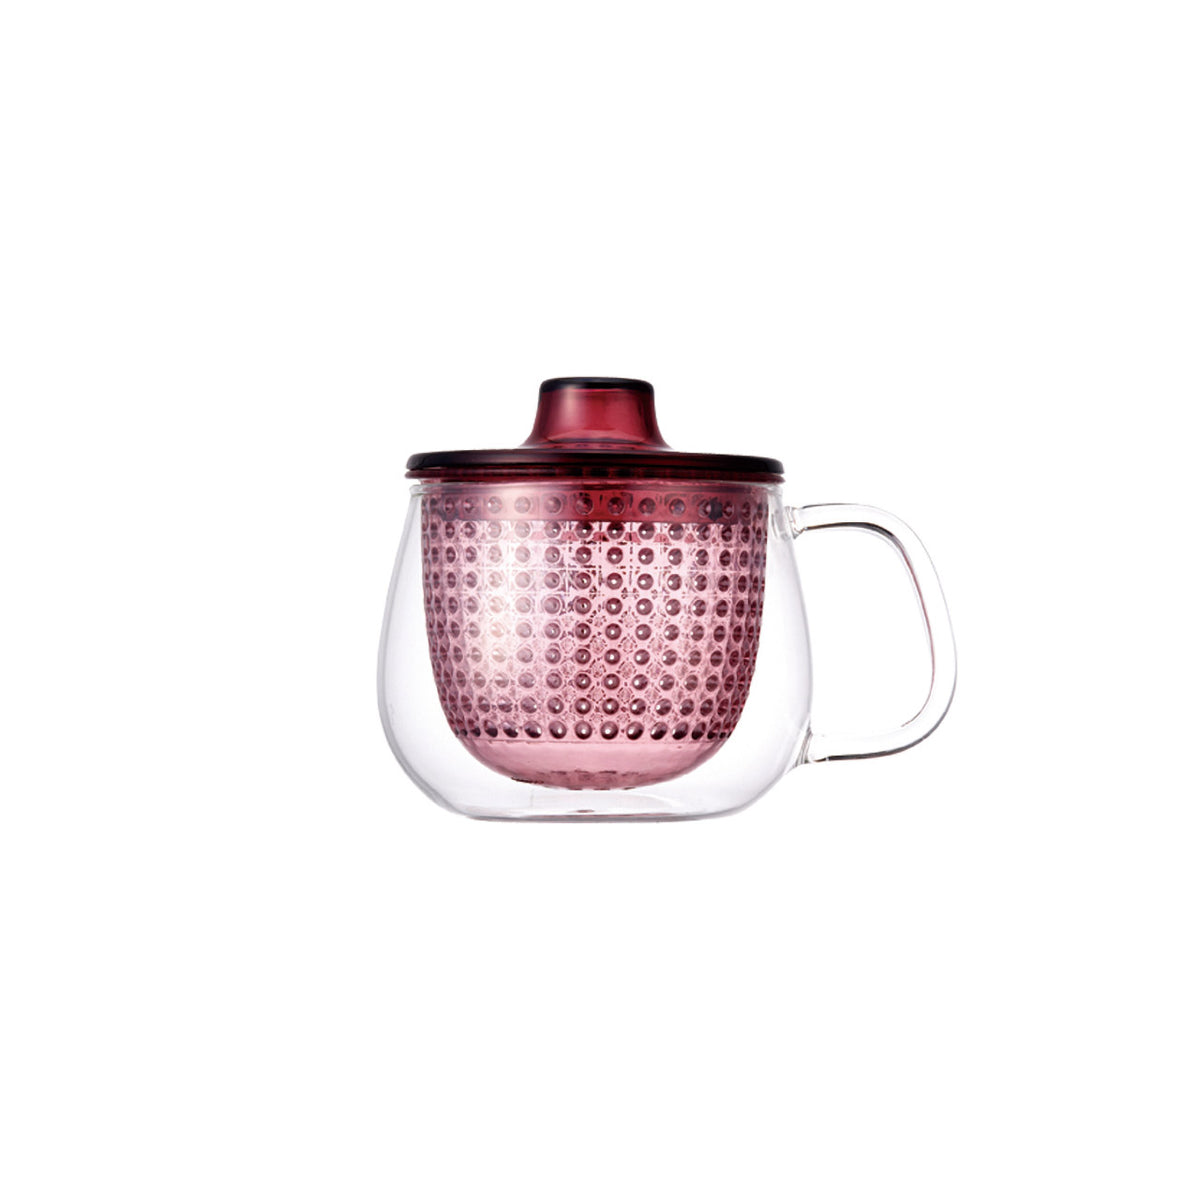 UNIMUG glass teapot in  red for loose leaf tea by The Rabbit Hole 